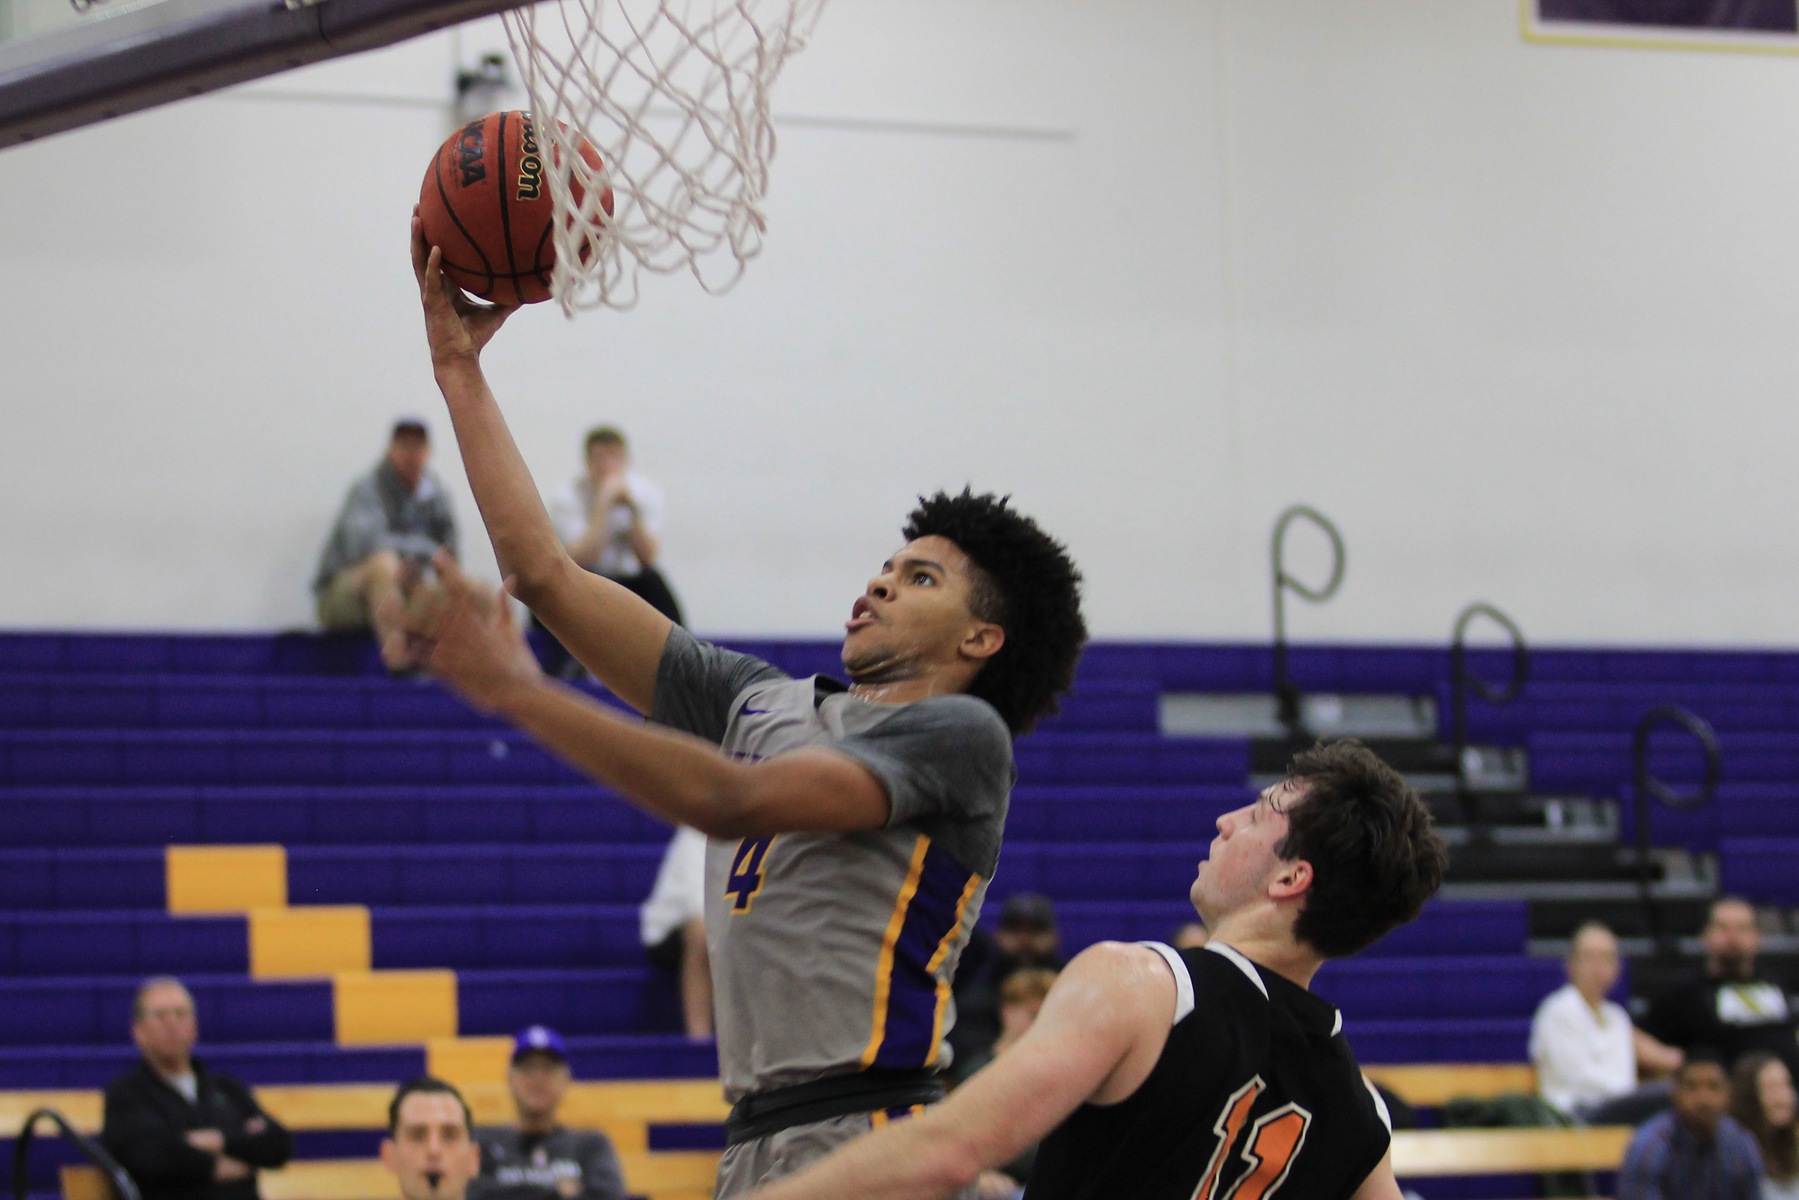 Cole Thomas scores double-digit points for ninth straight game as Kingsmen take on Oxy. (Photo: Gabby Flores)